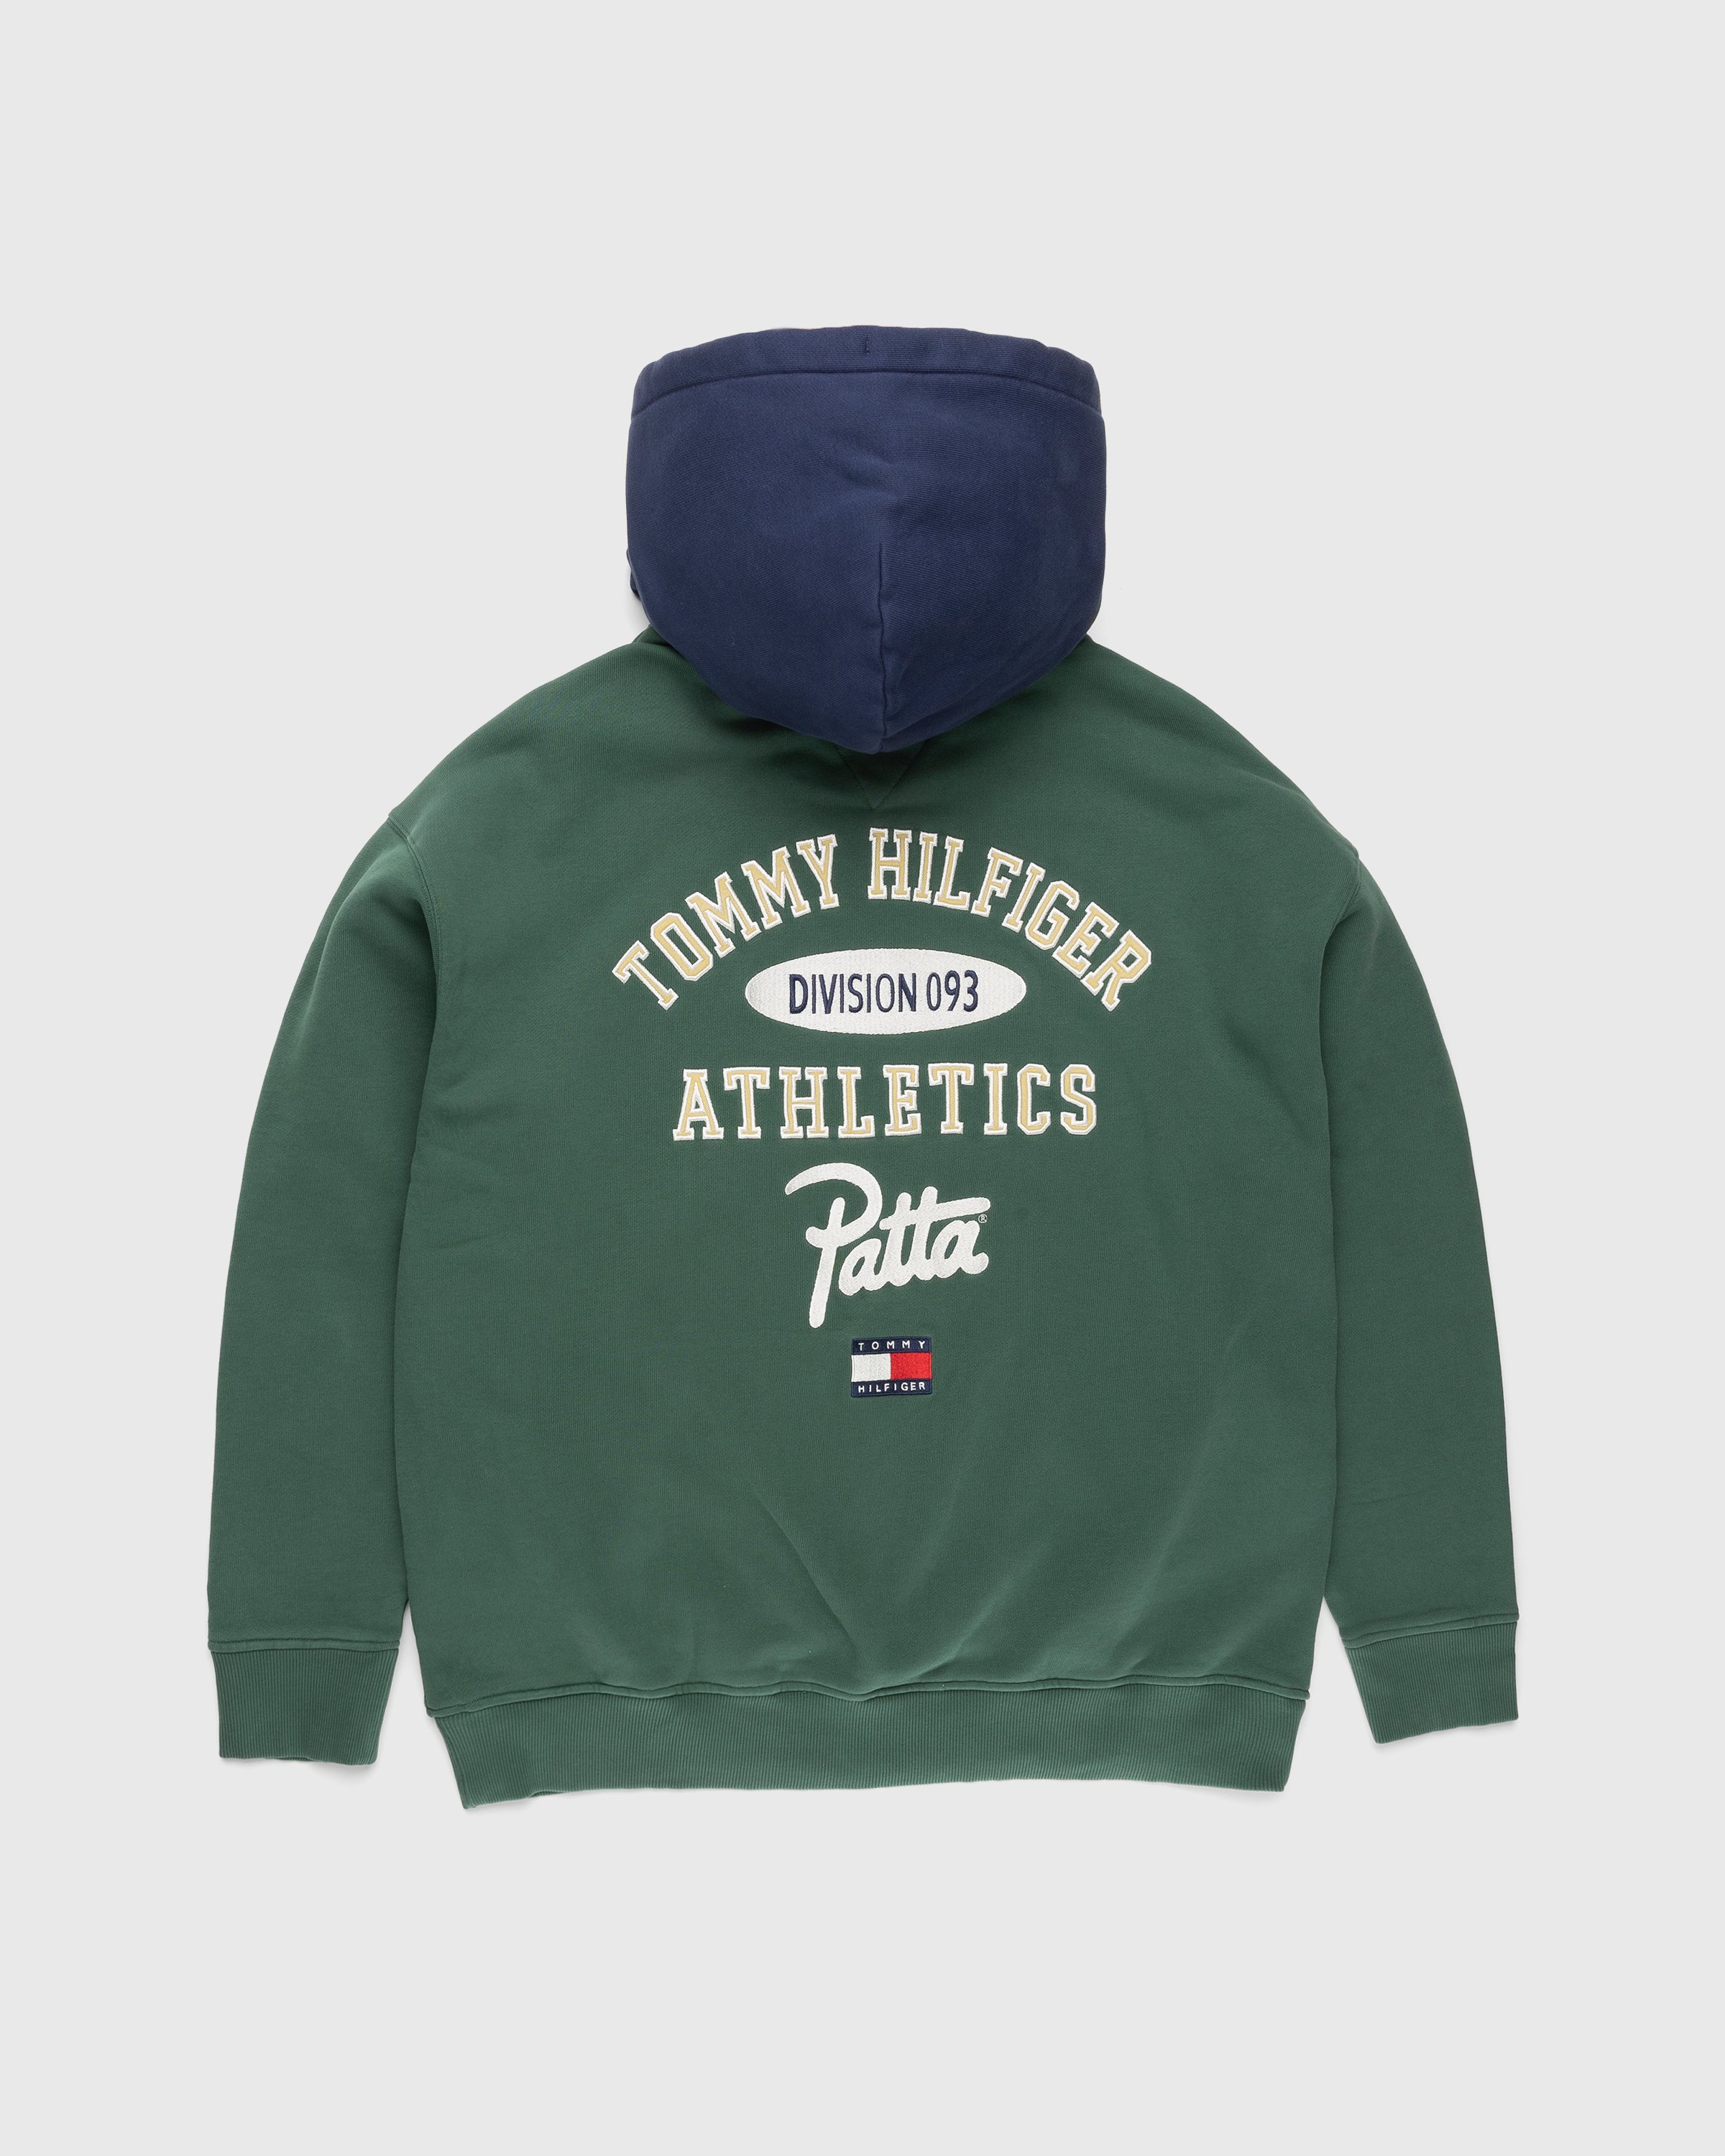 Patta x Tommy Hilfiger - Hoodie Midnight Green - Clothing - Green - Image 2